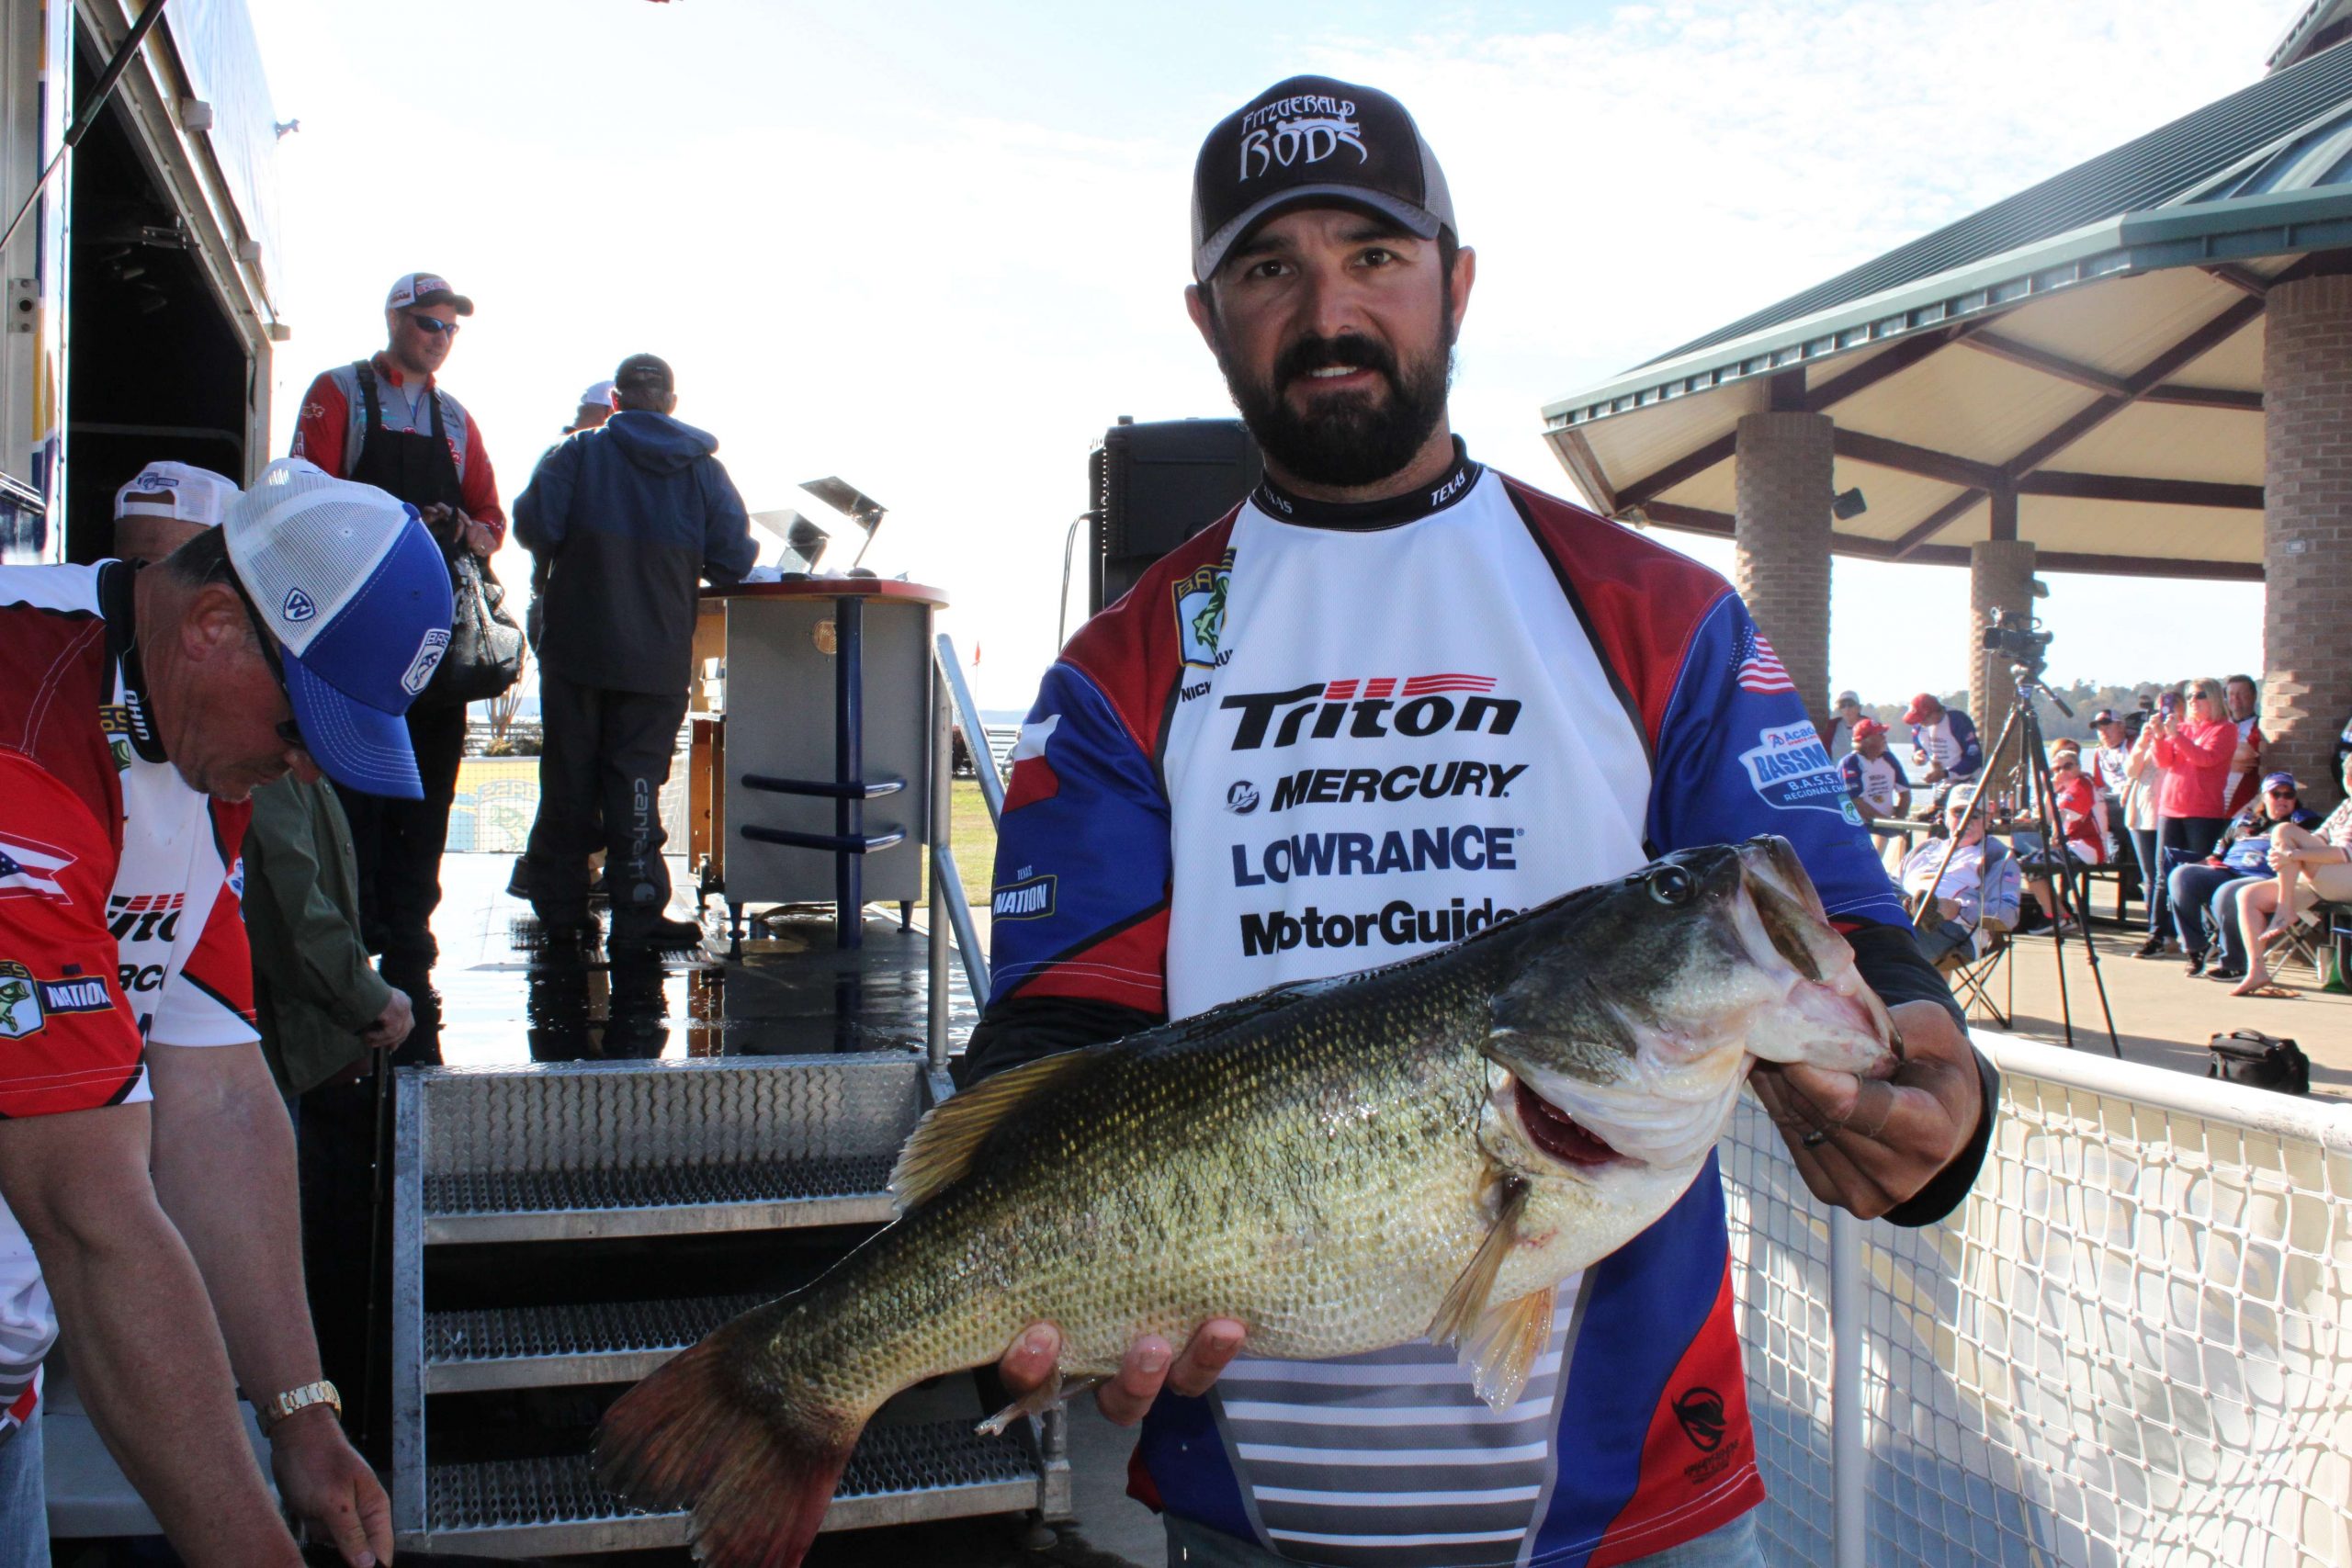 And the Toledo Bend hits just keep coming. That's Texas' Nickolas LeBrun with an 8-6 bass. He's in 32nd place with 28-4 and he will fish on Friday.
